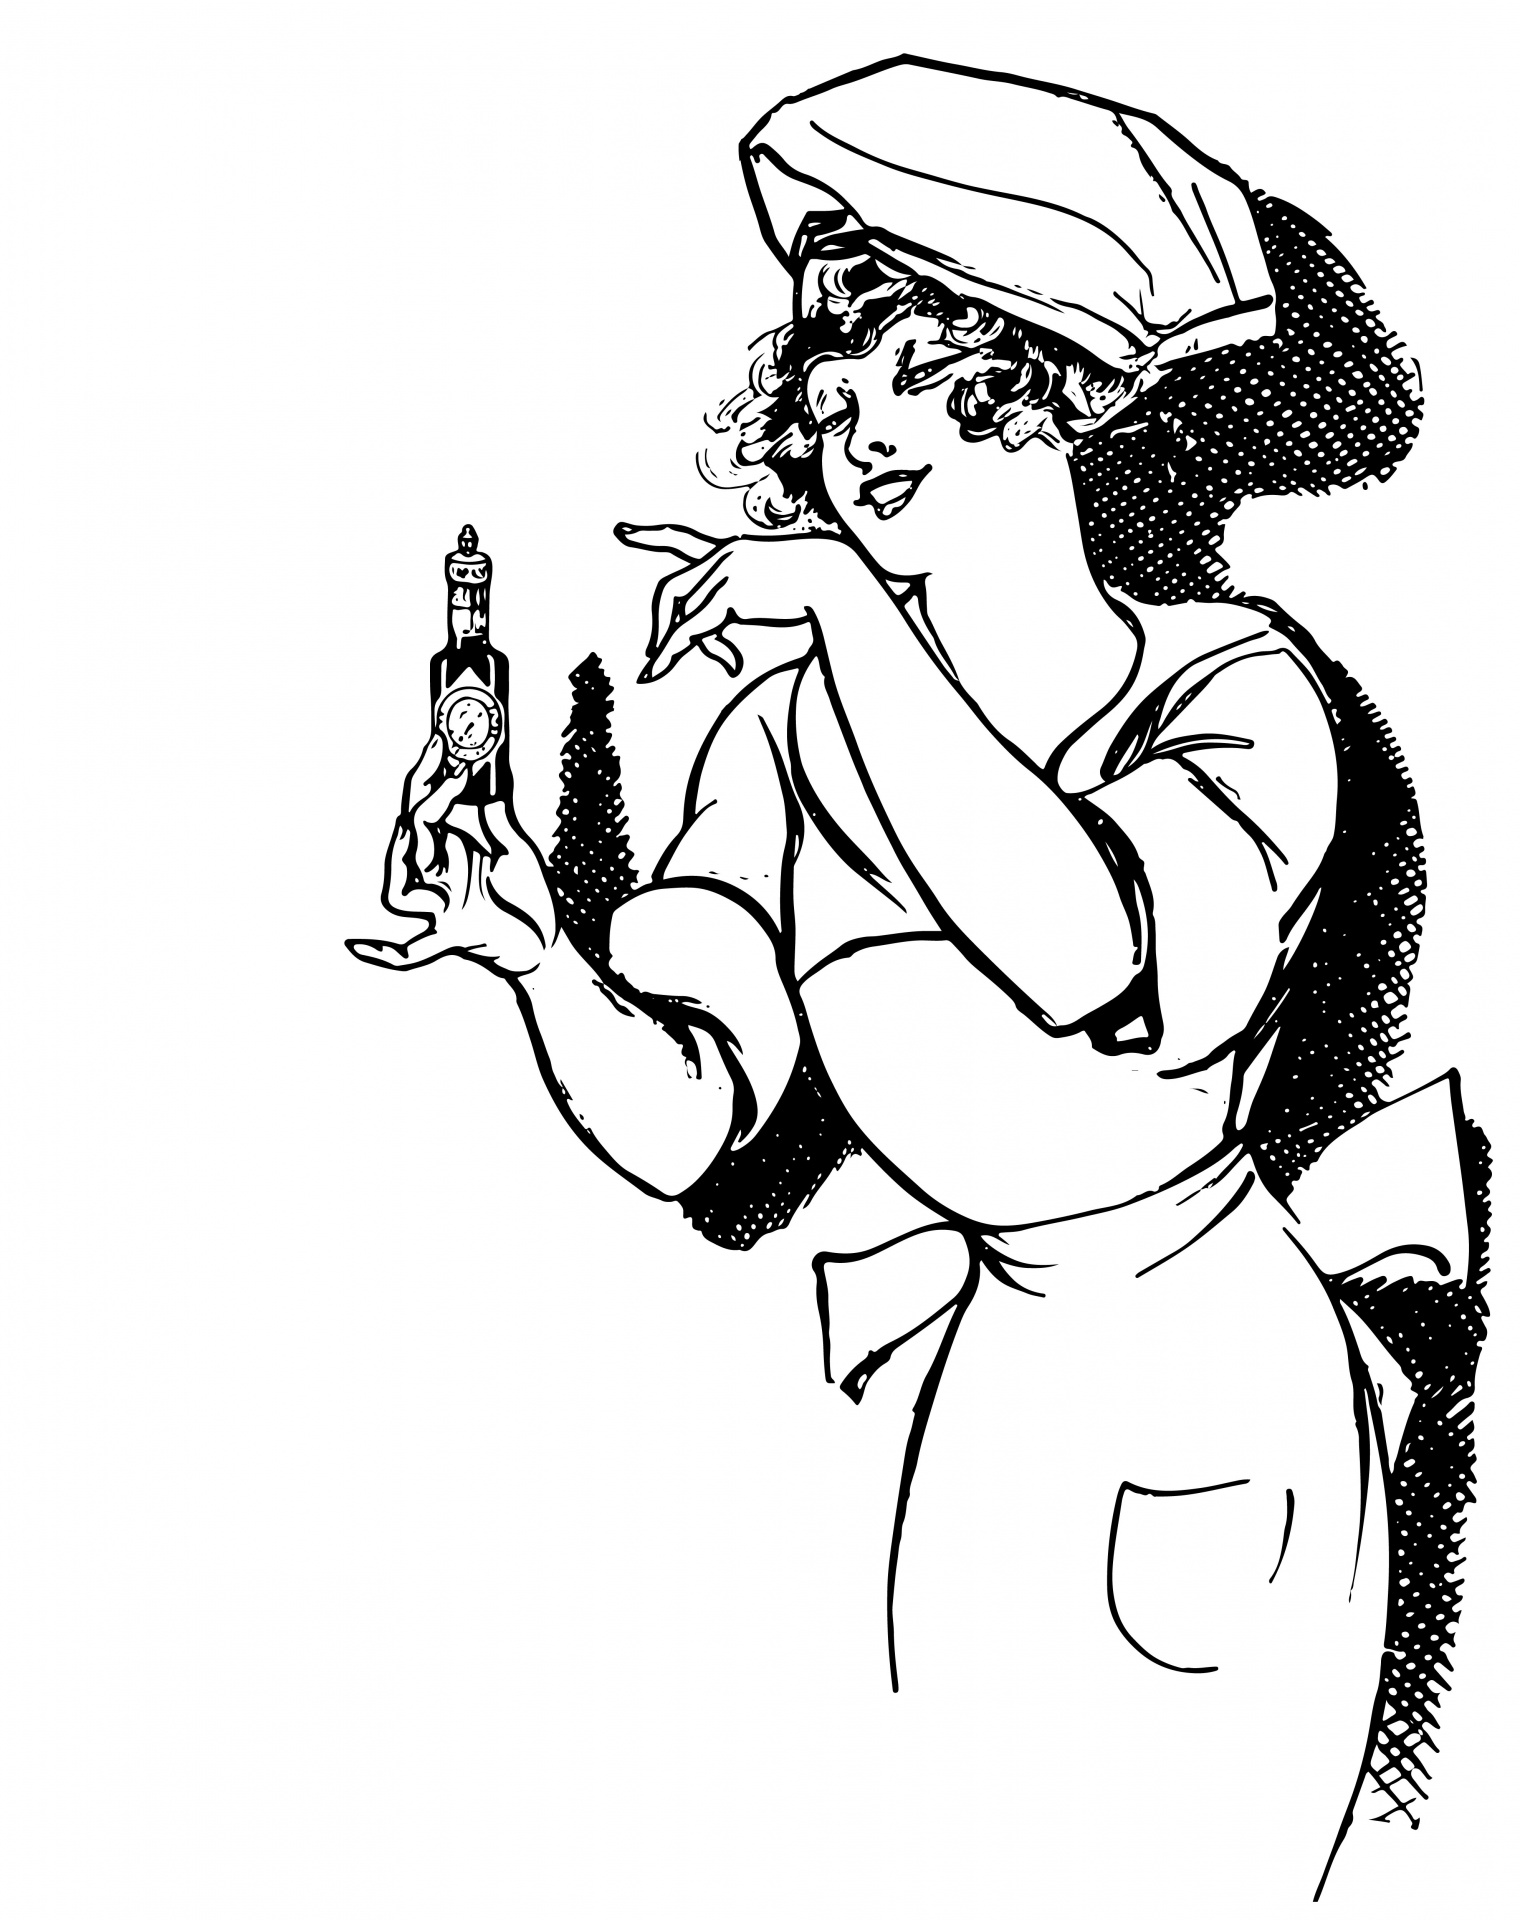 Line art illustration of a retro, vintage woman cook, chef with bottle of sauce in black on white background